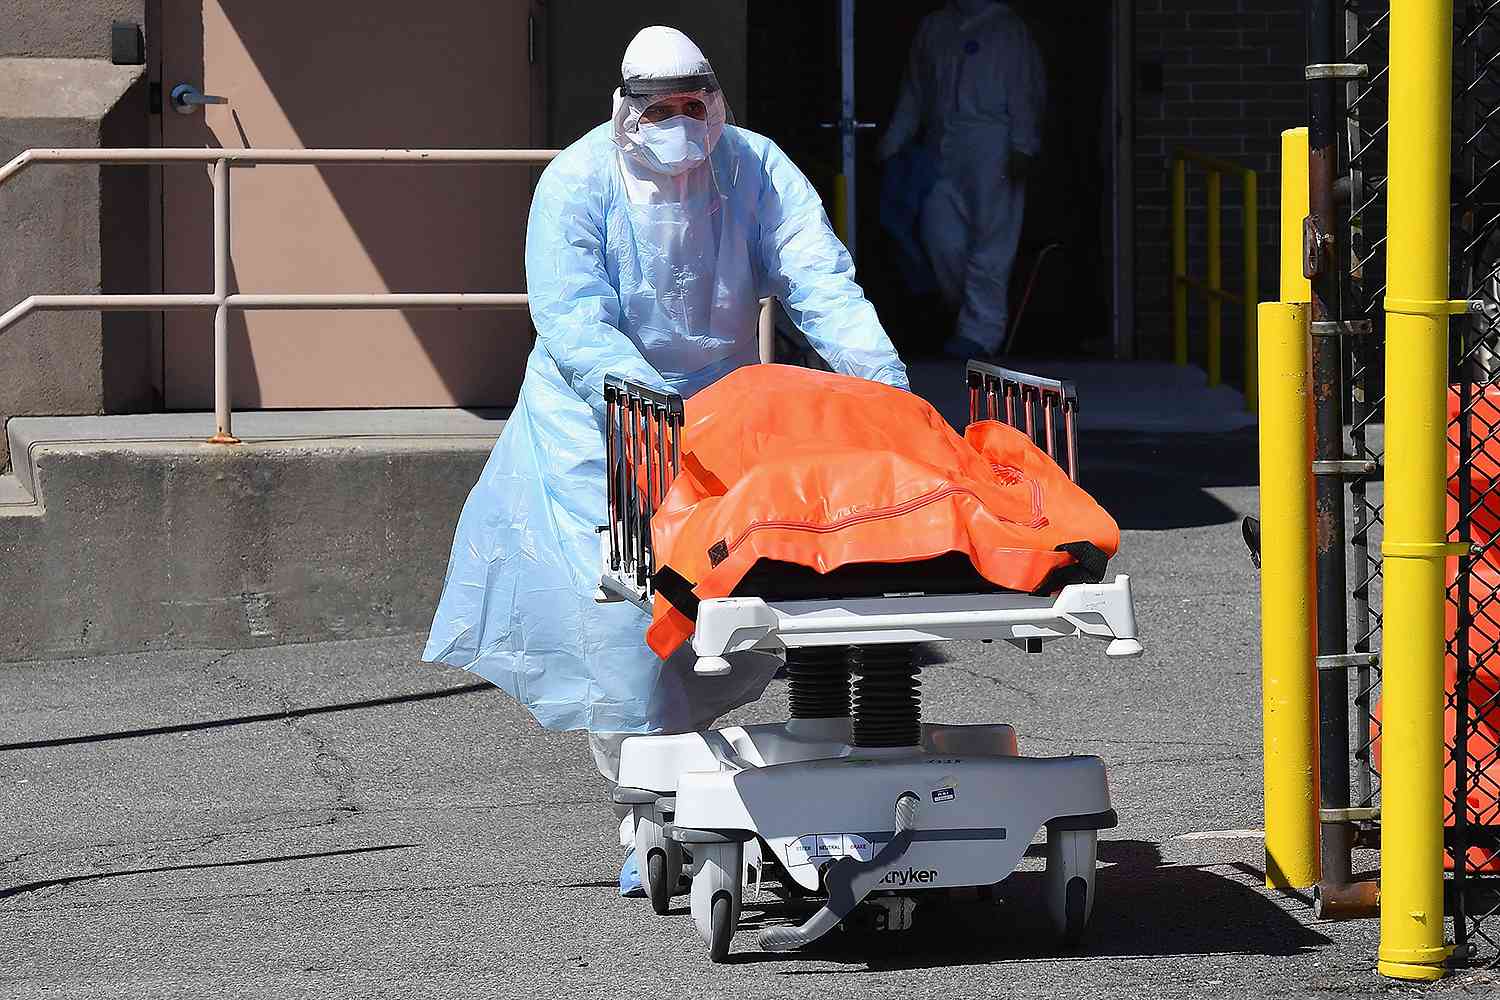 California Orders Thousands of Body Bags as State Activates 'Mass Fatality' COVID Program